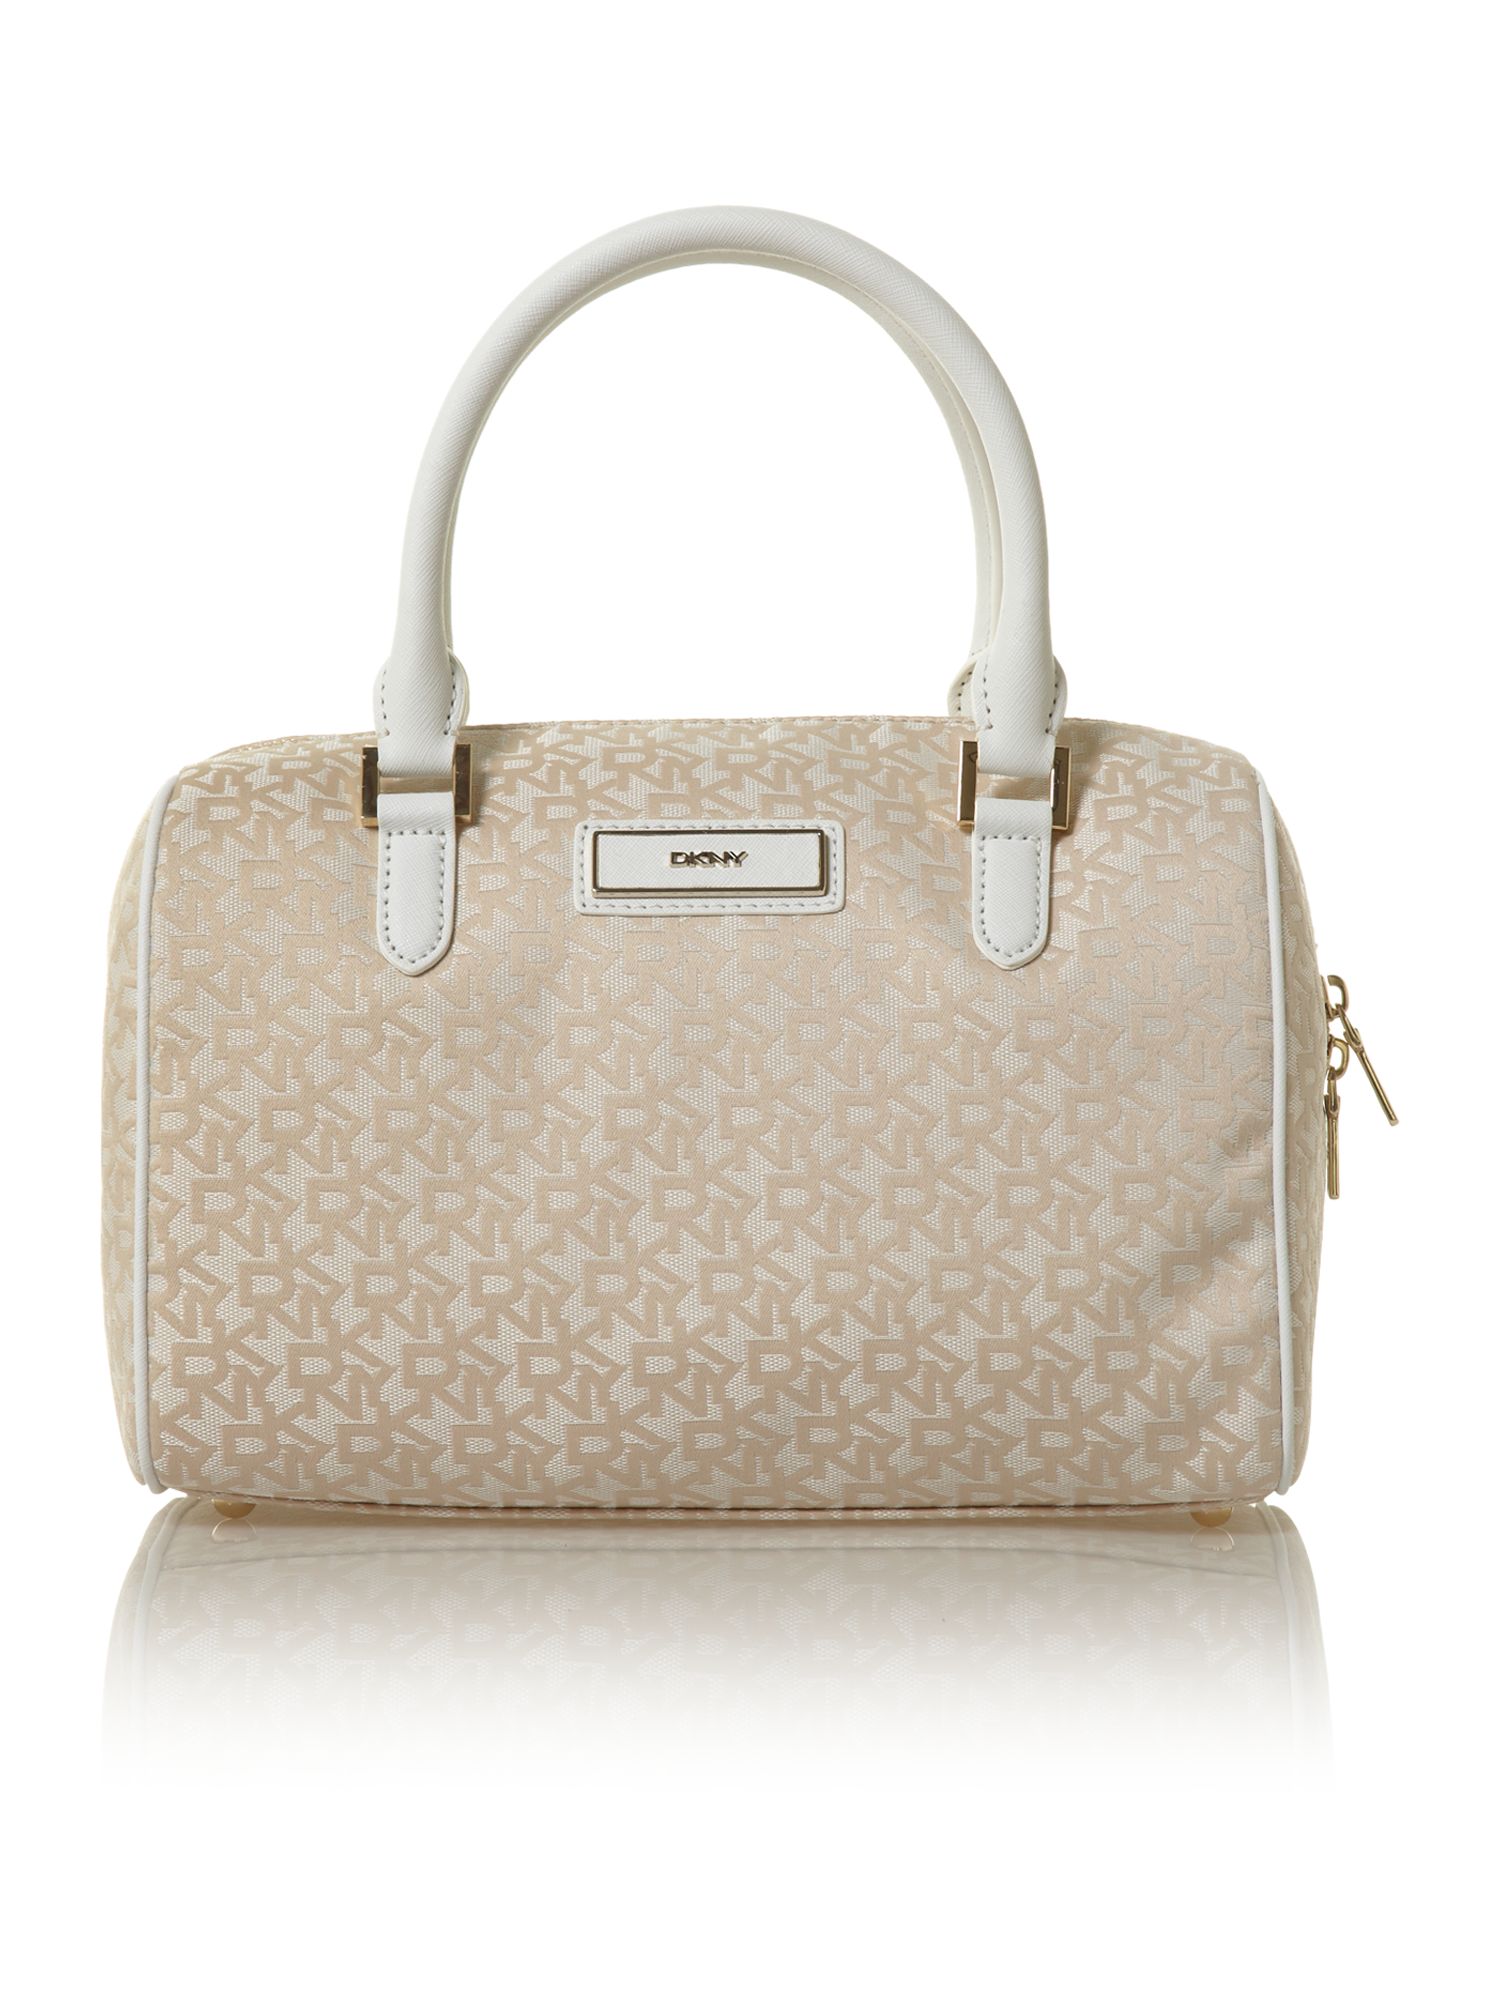 Dkny Saffiano Bowling Bag in White (pink) | Lyst